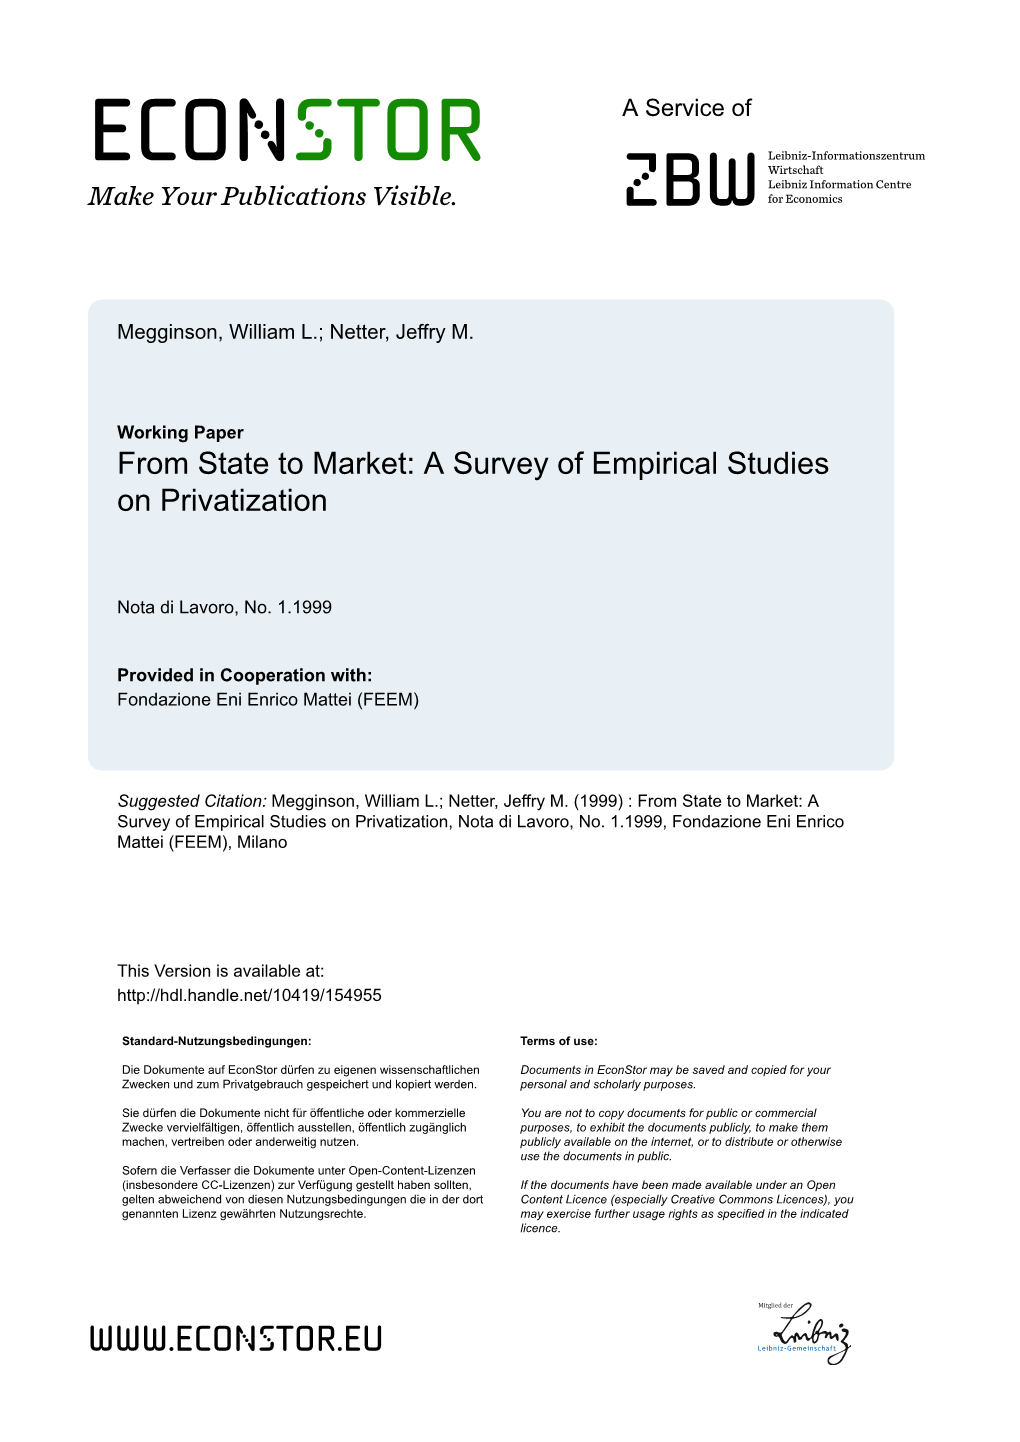 From State to Market: a Survey of Empirical Studies on Privatization